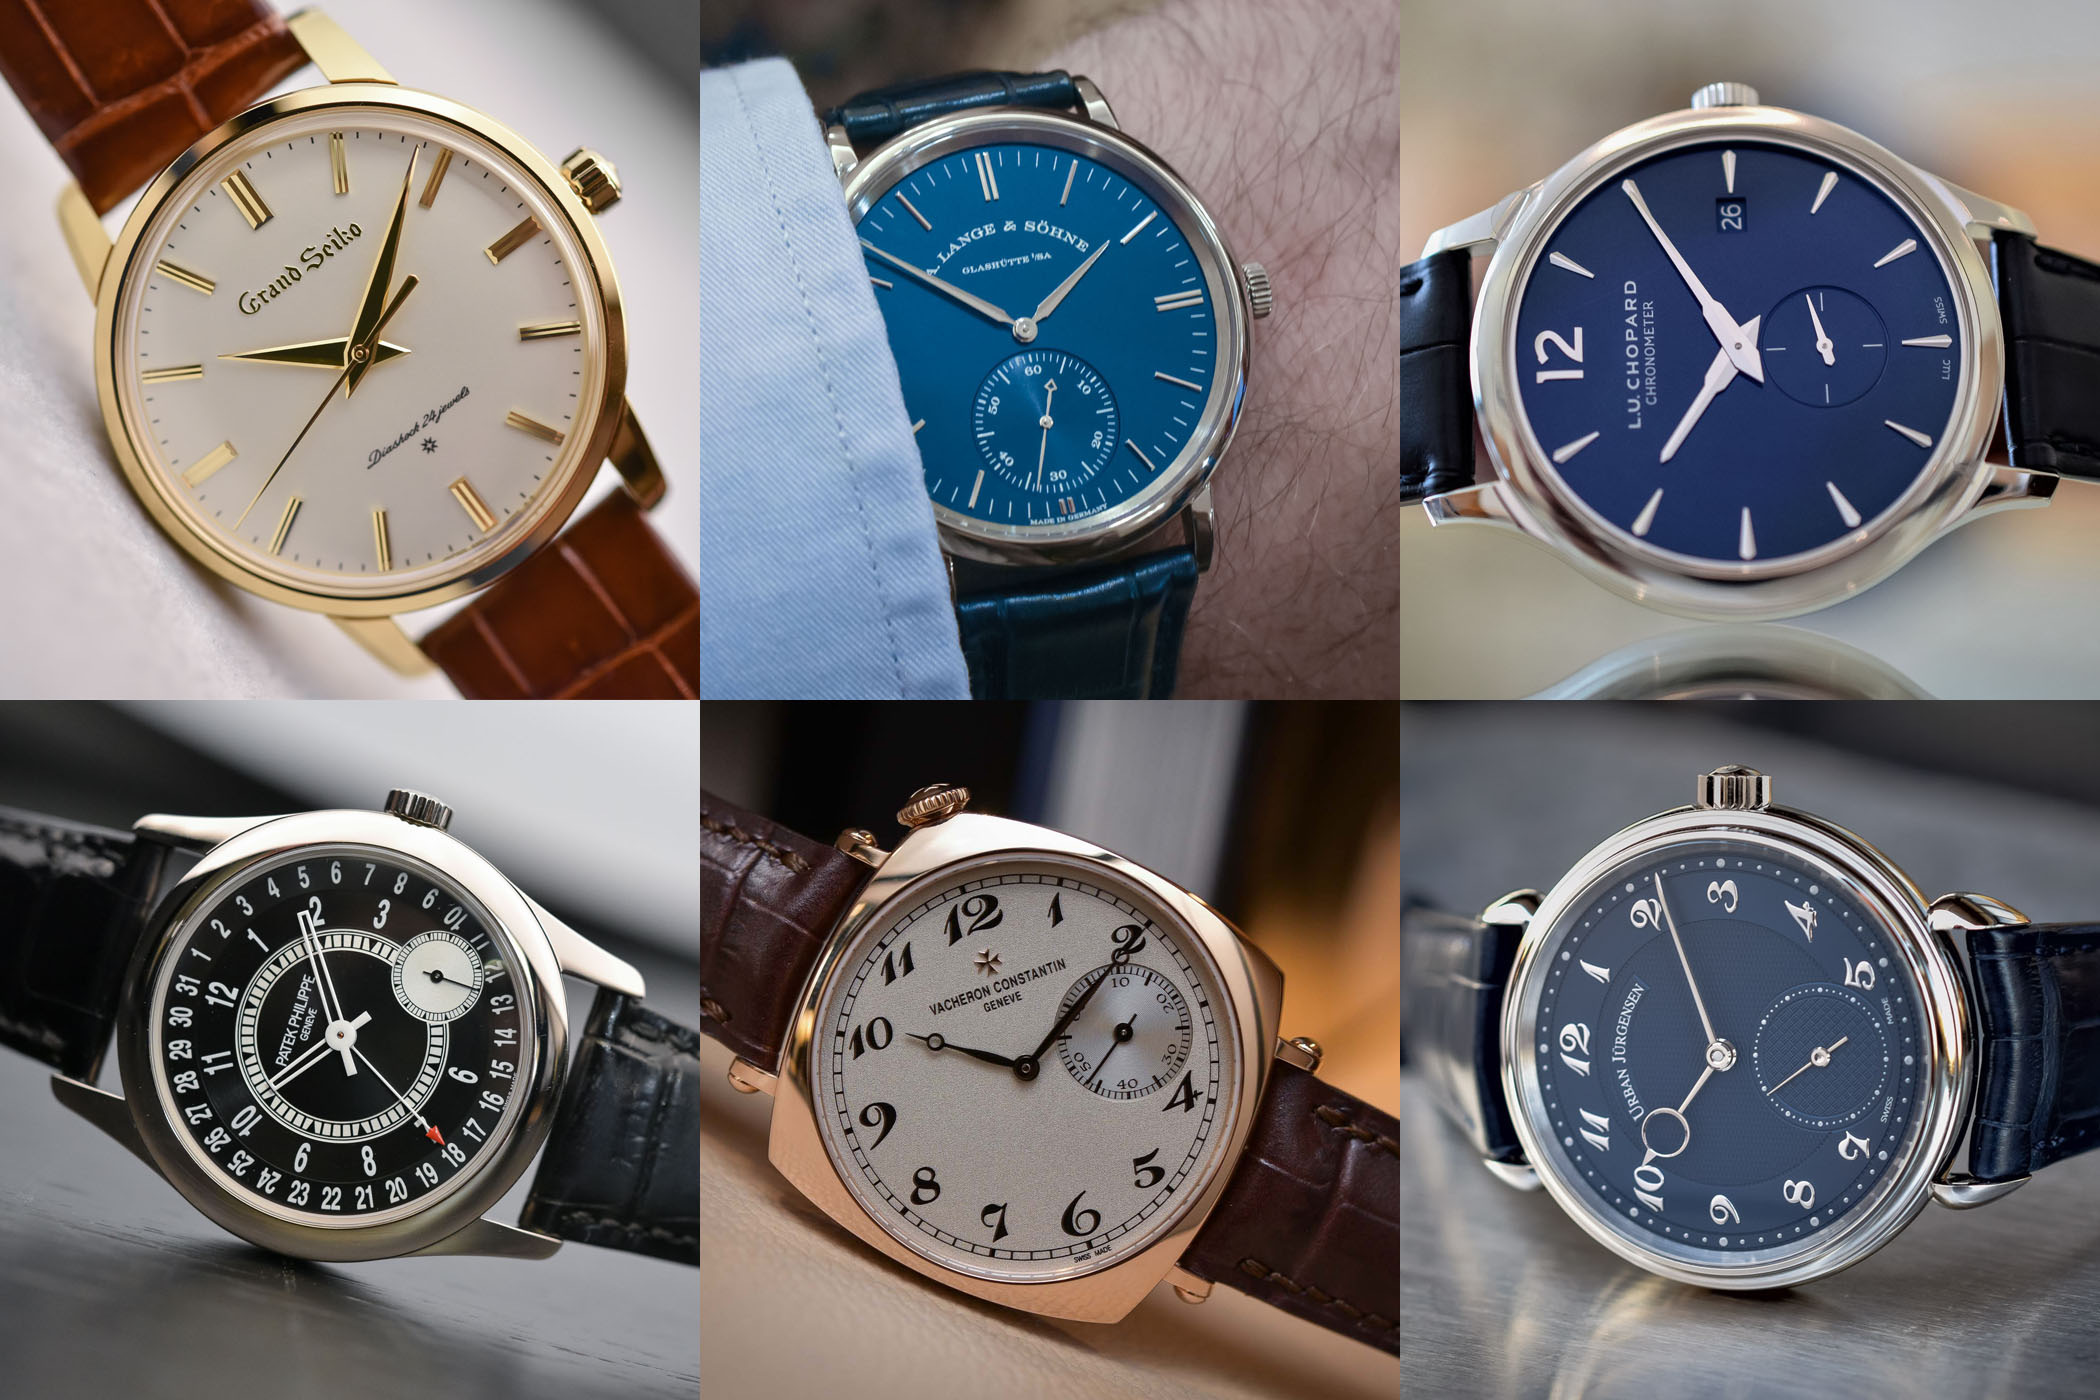 Buying Guide The Best Dress Watches of 2017 Part 1